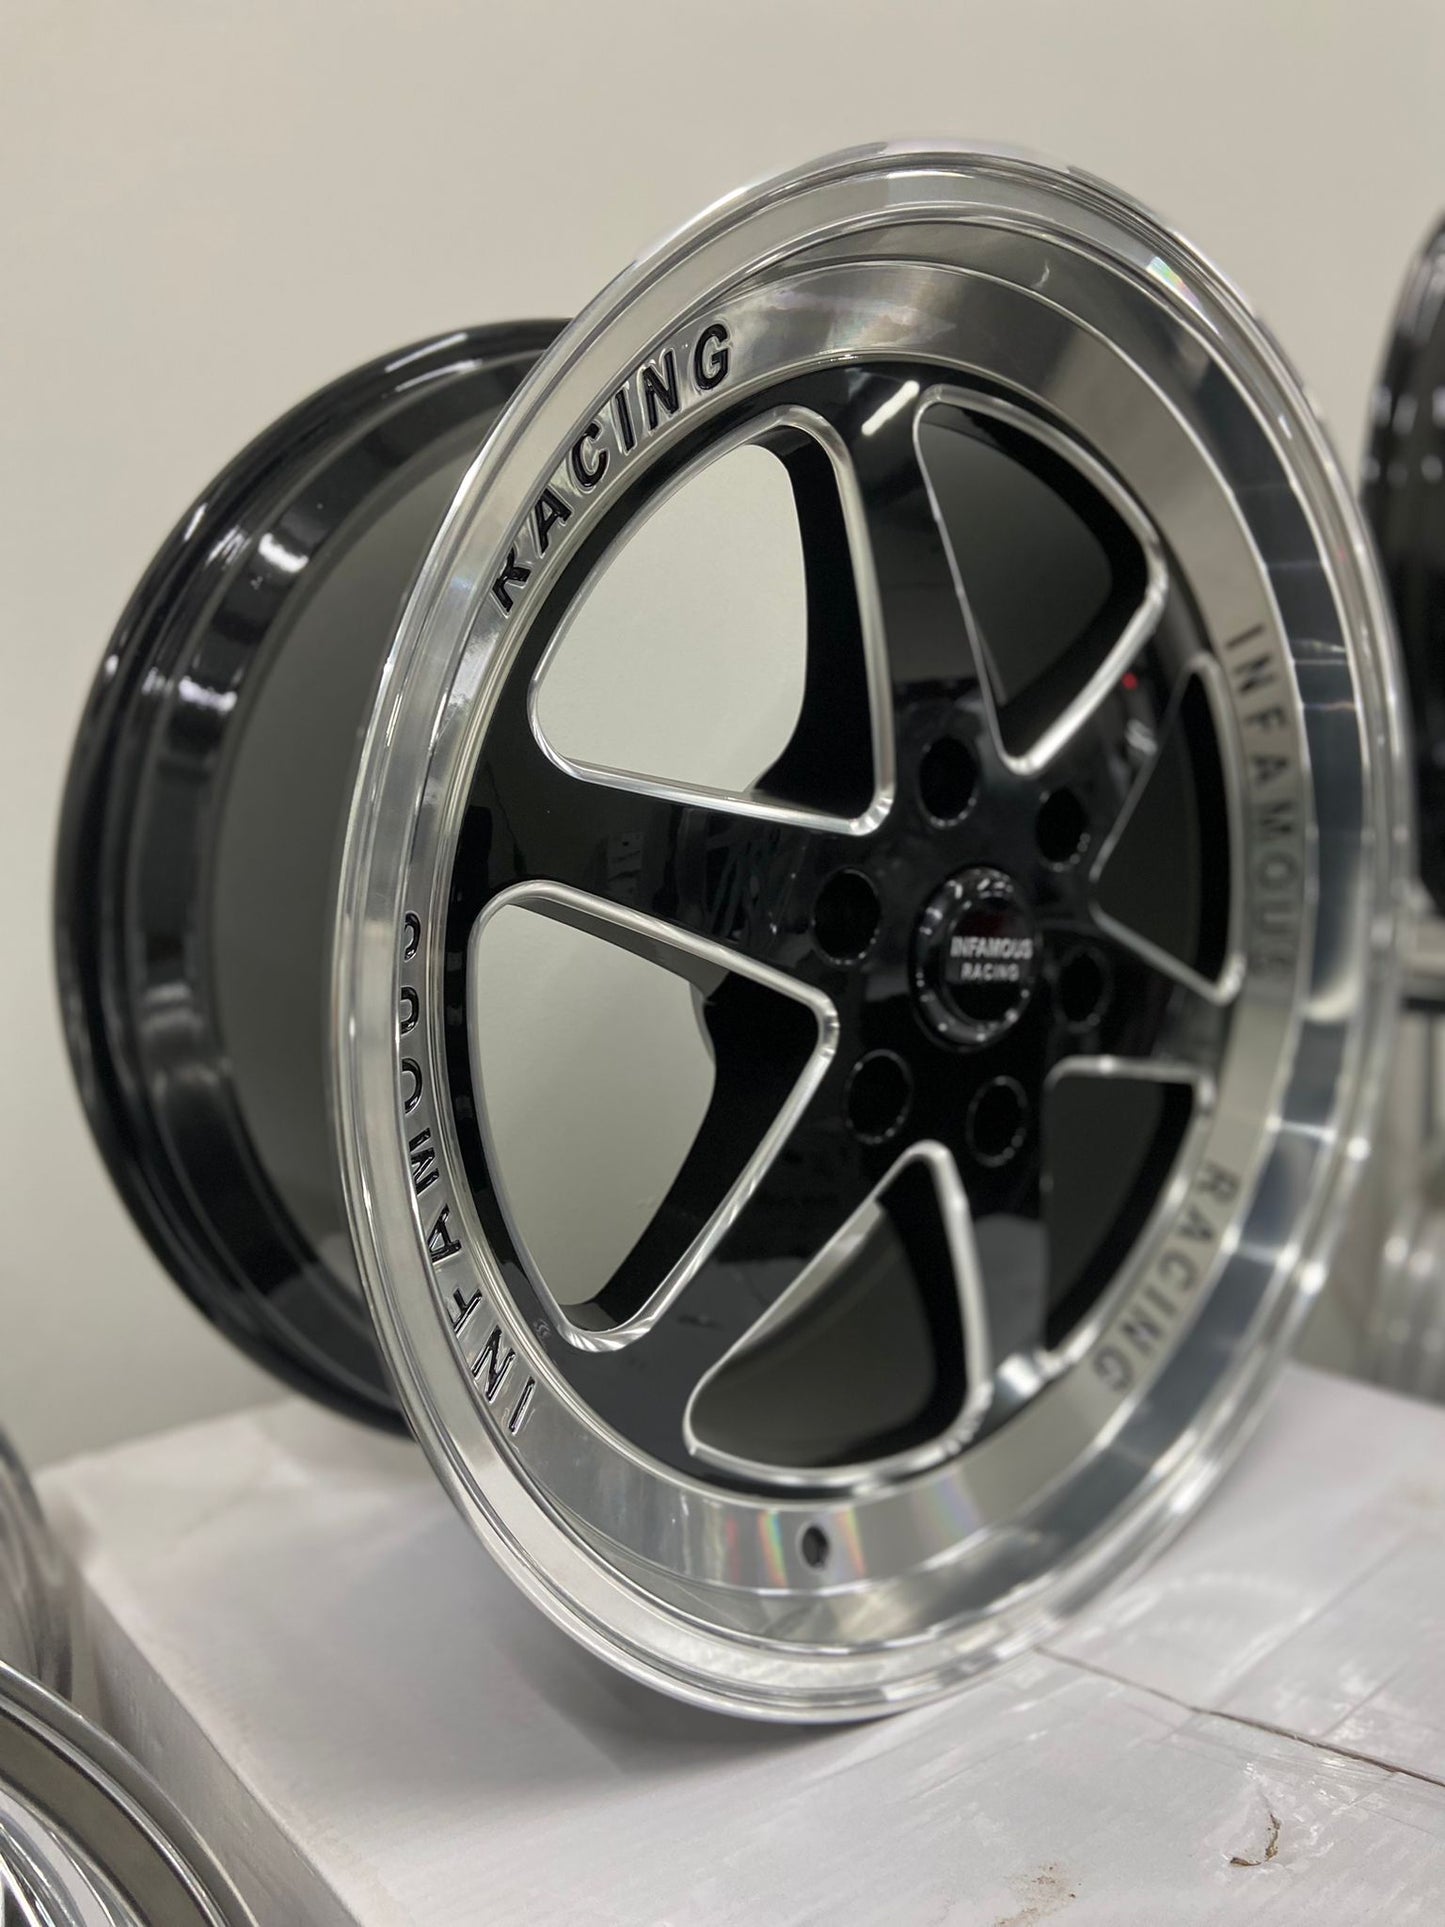 20" Infamous Racing Wheels - Staggered